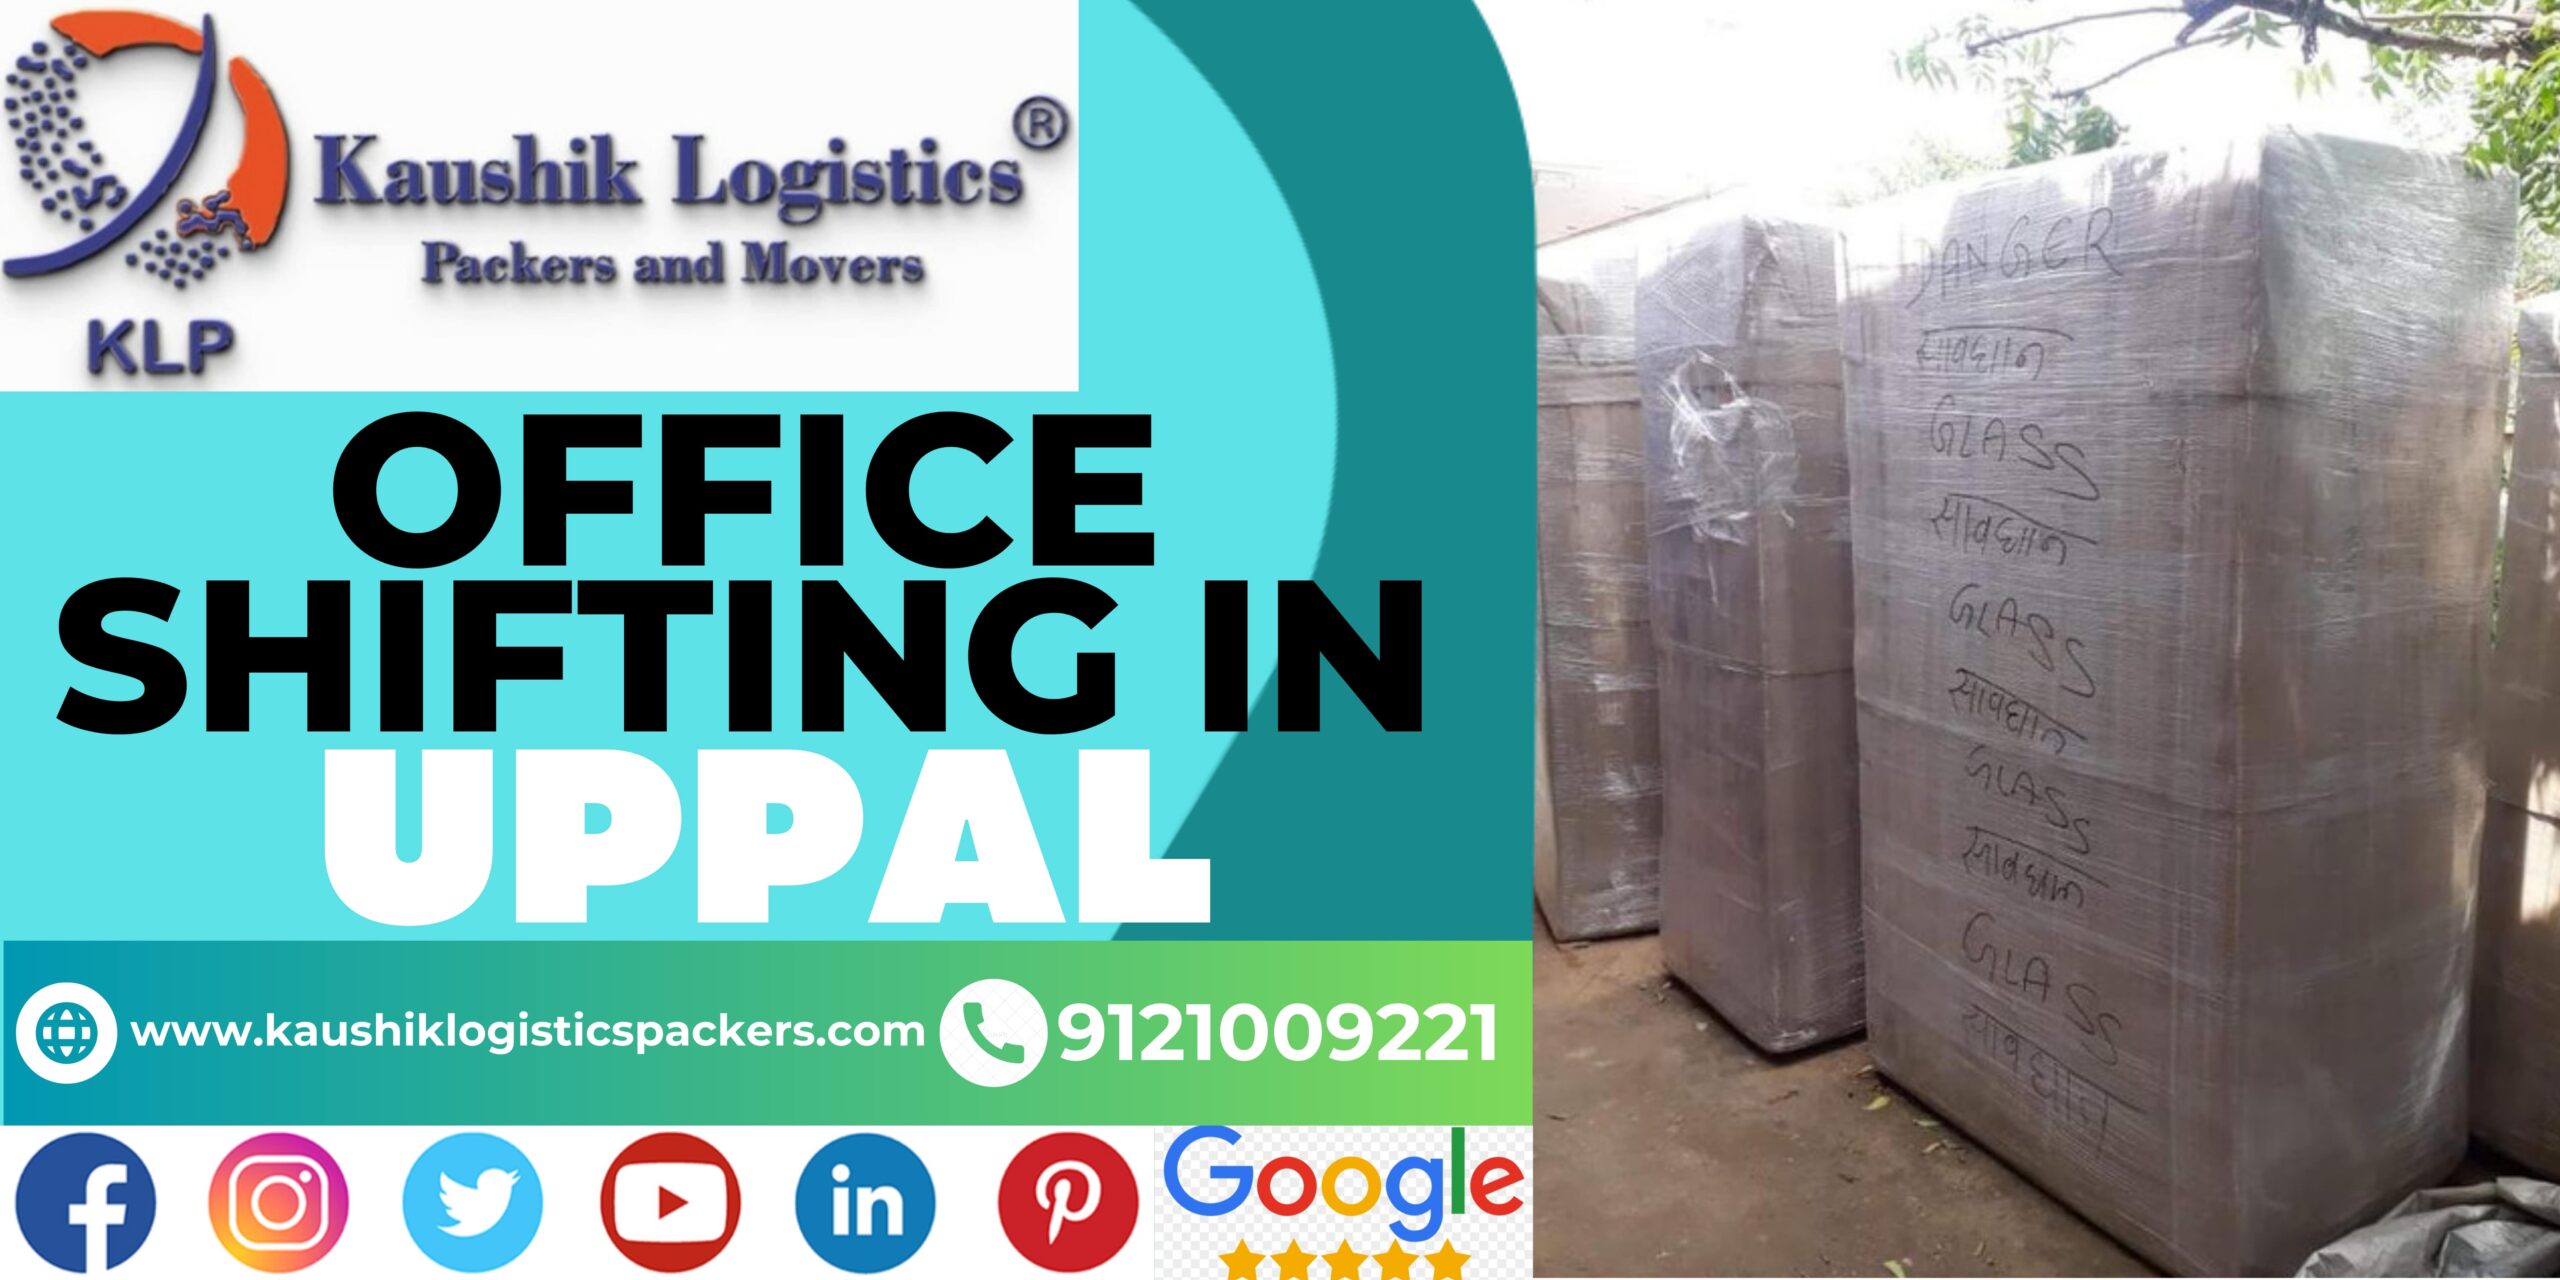 Packers and Movers In Uppal